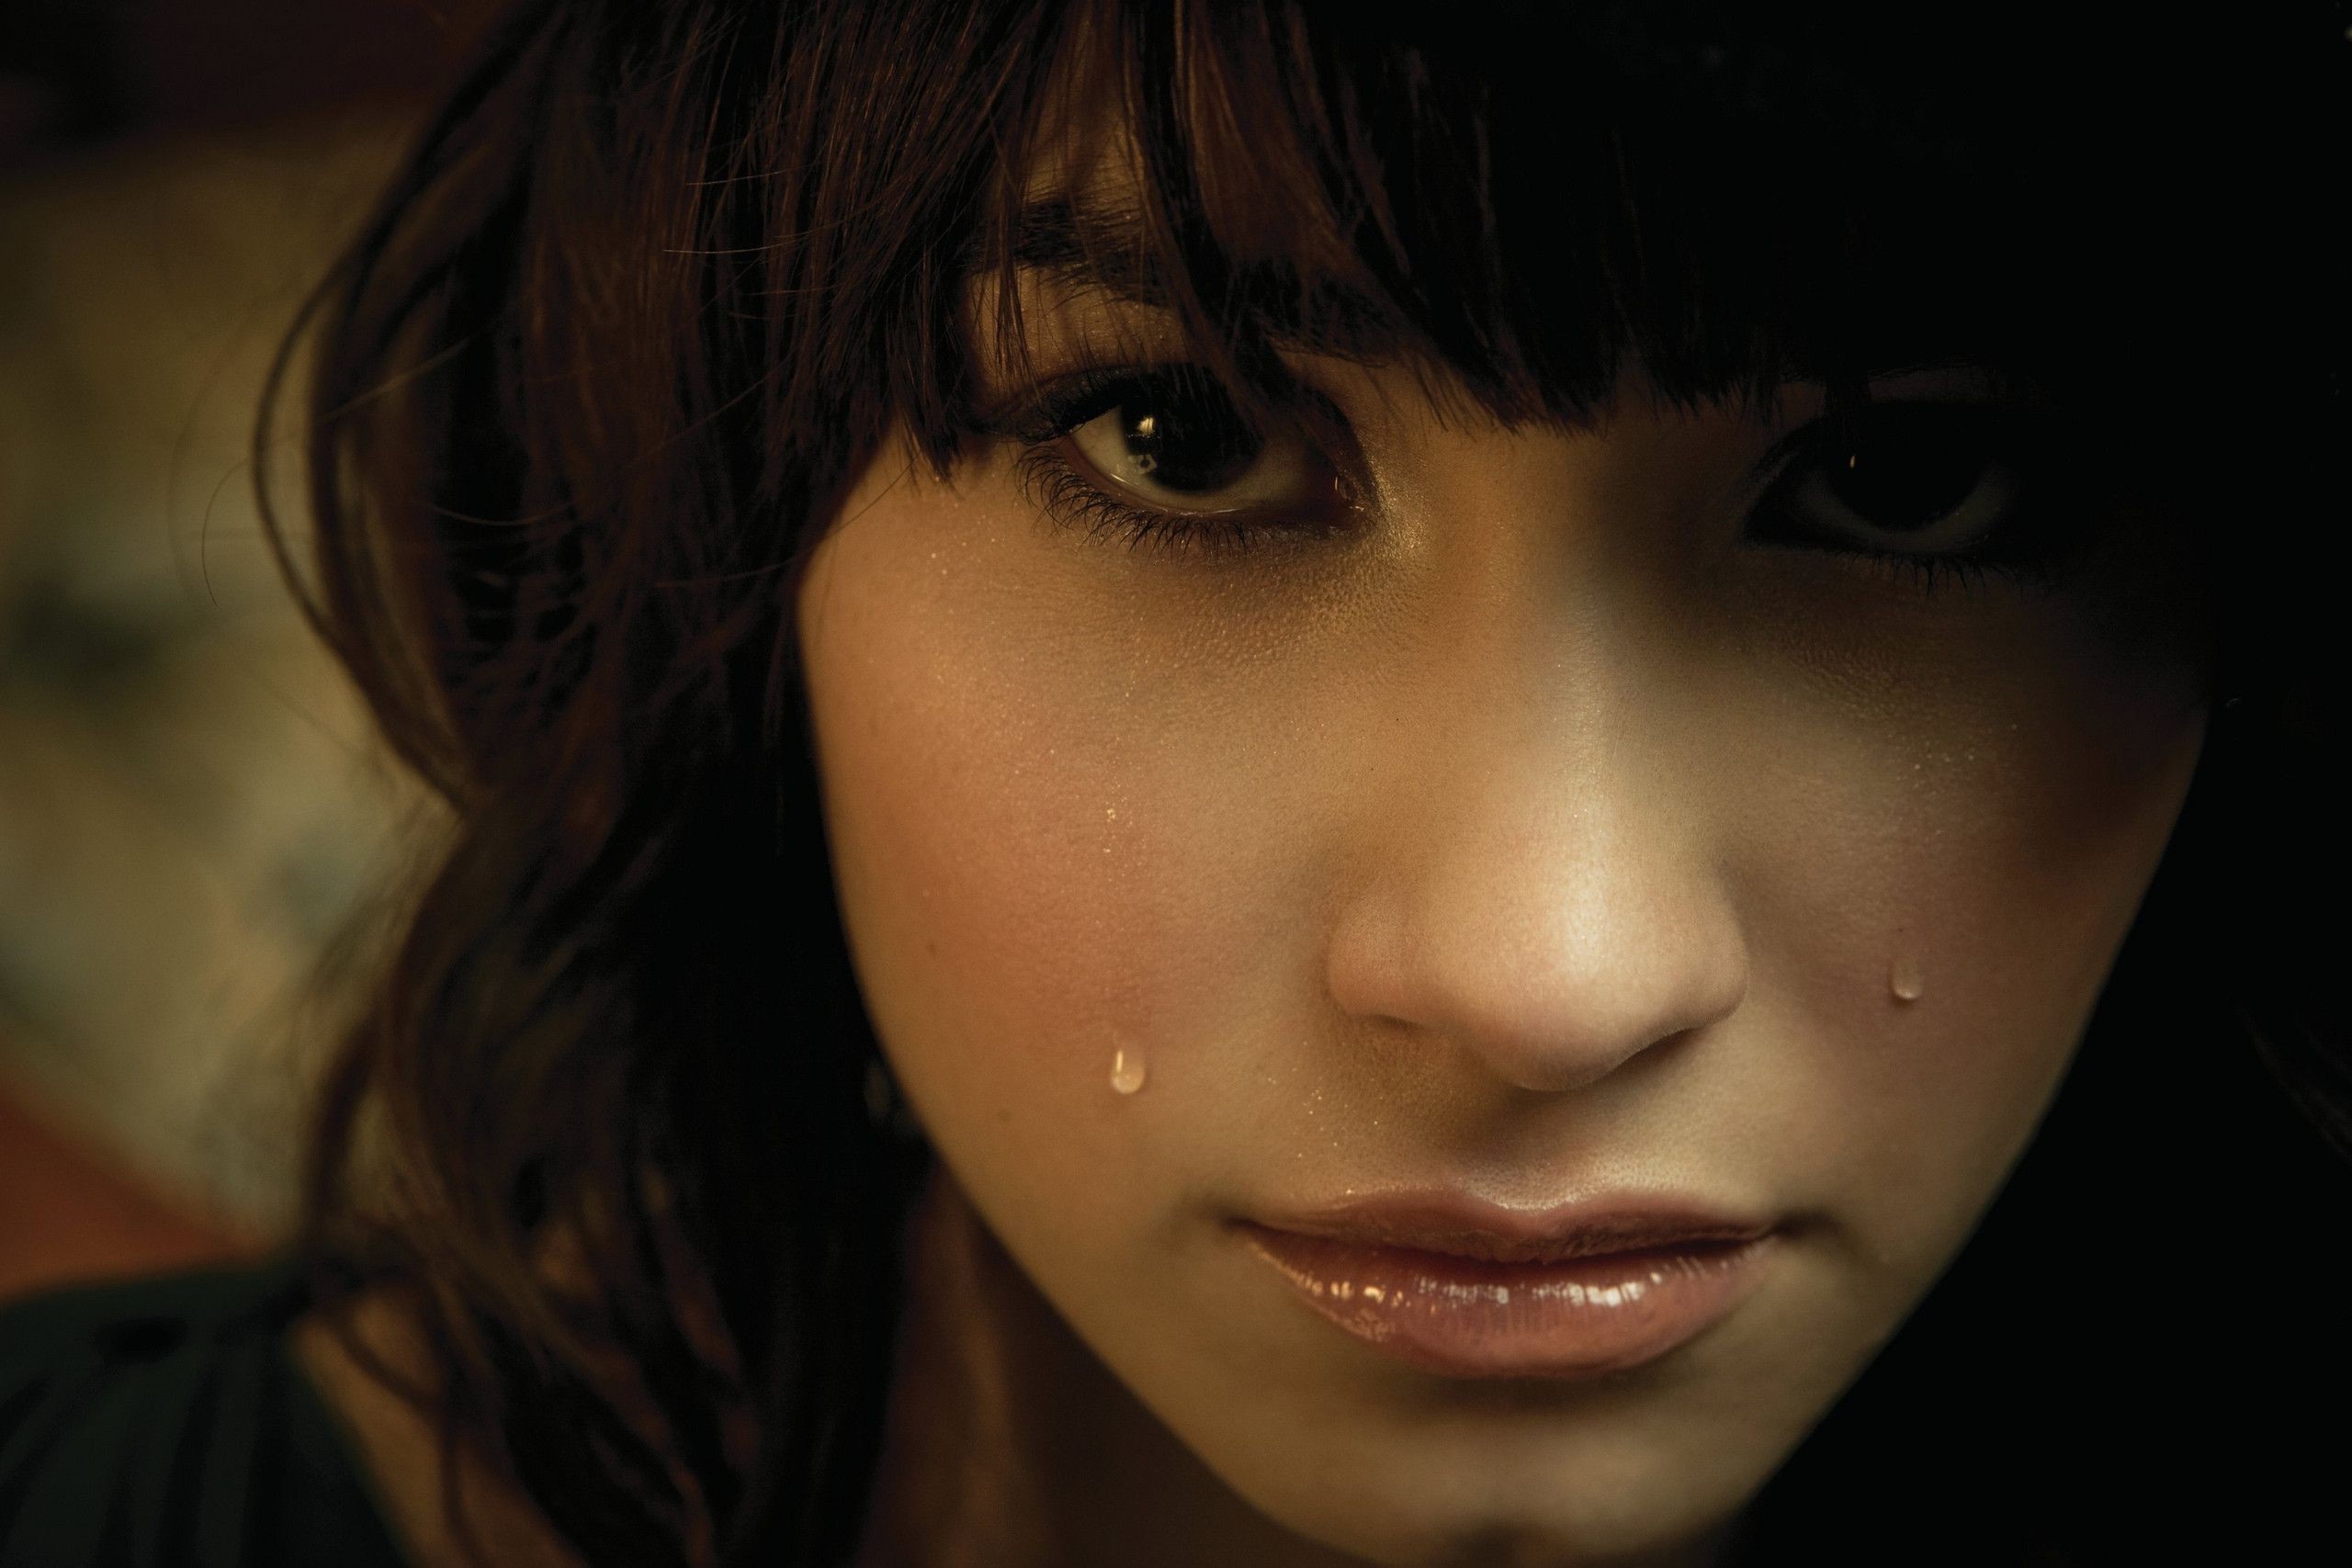 sad full of tears wallpapers,face,hair,nose,lip,eyebrow